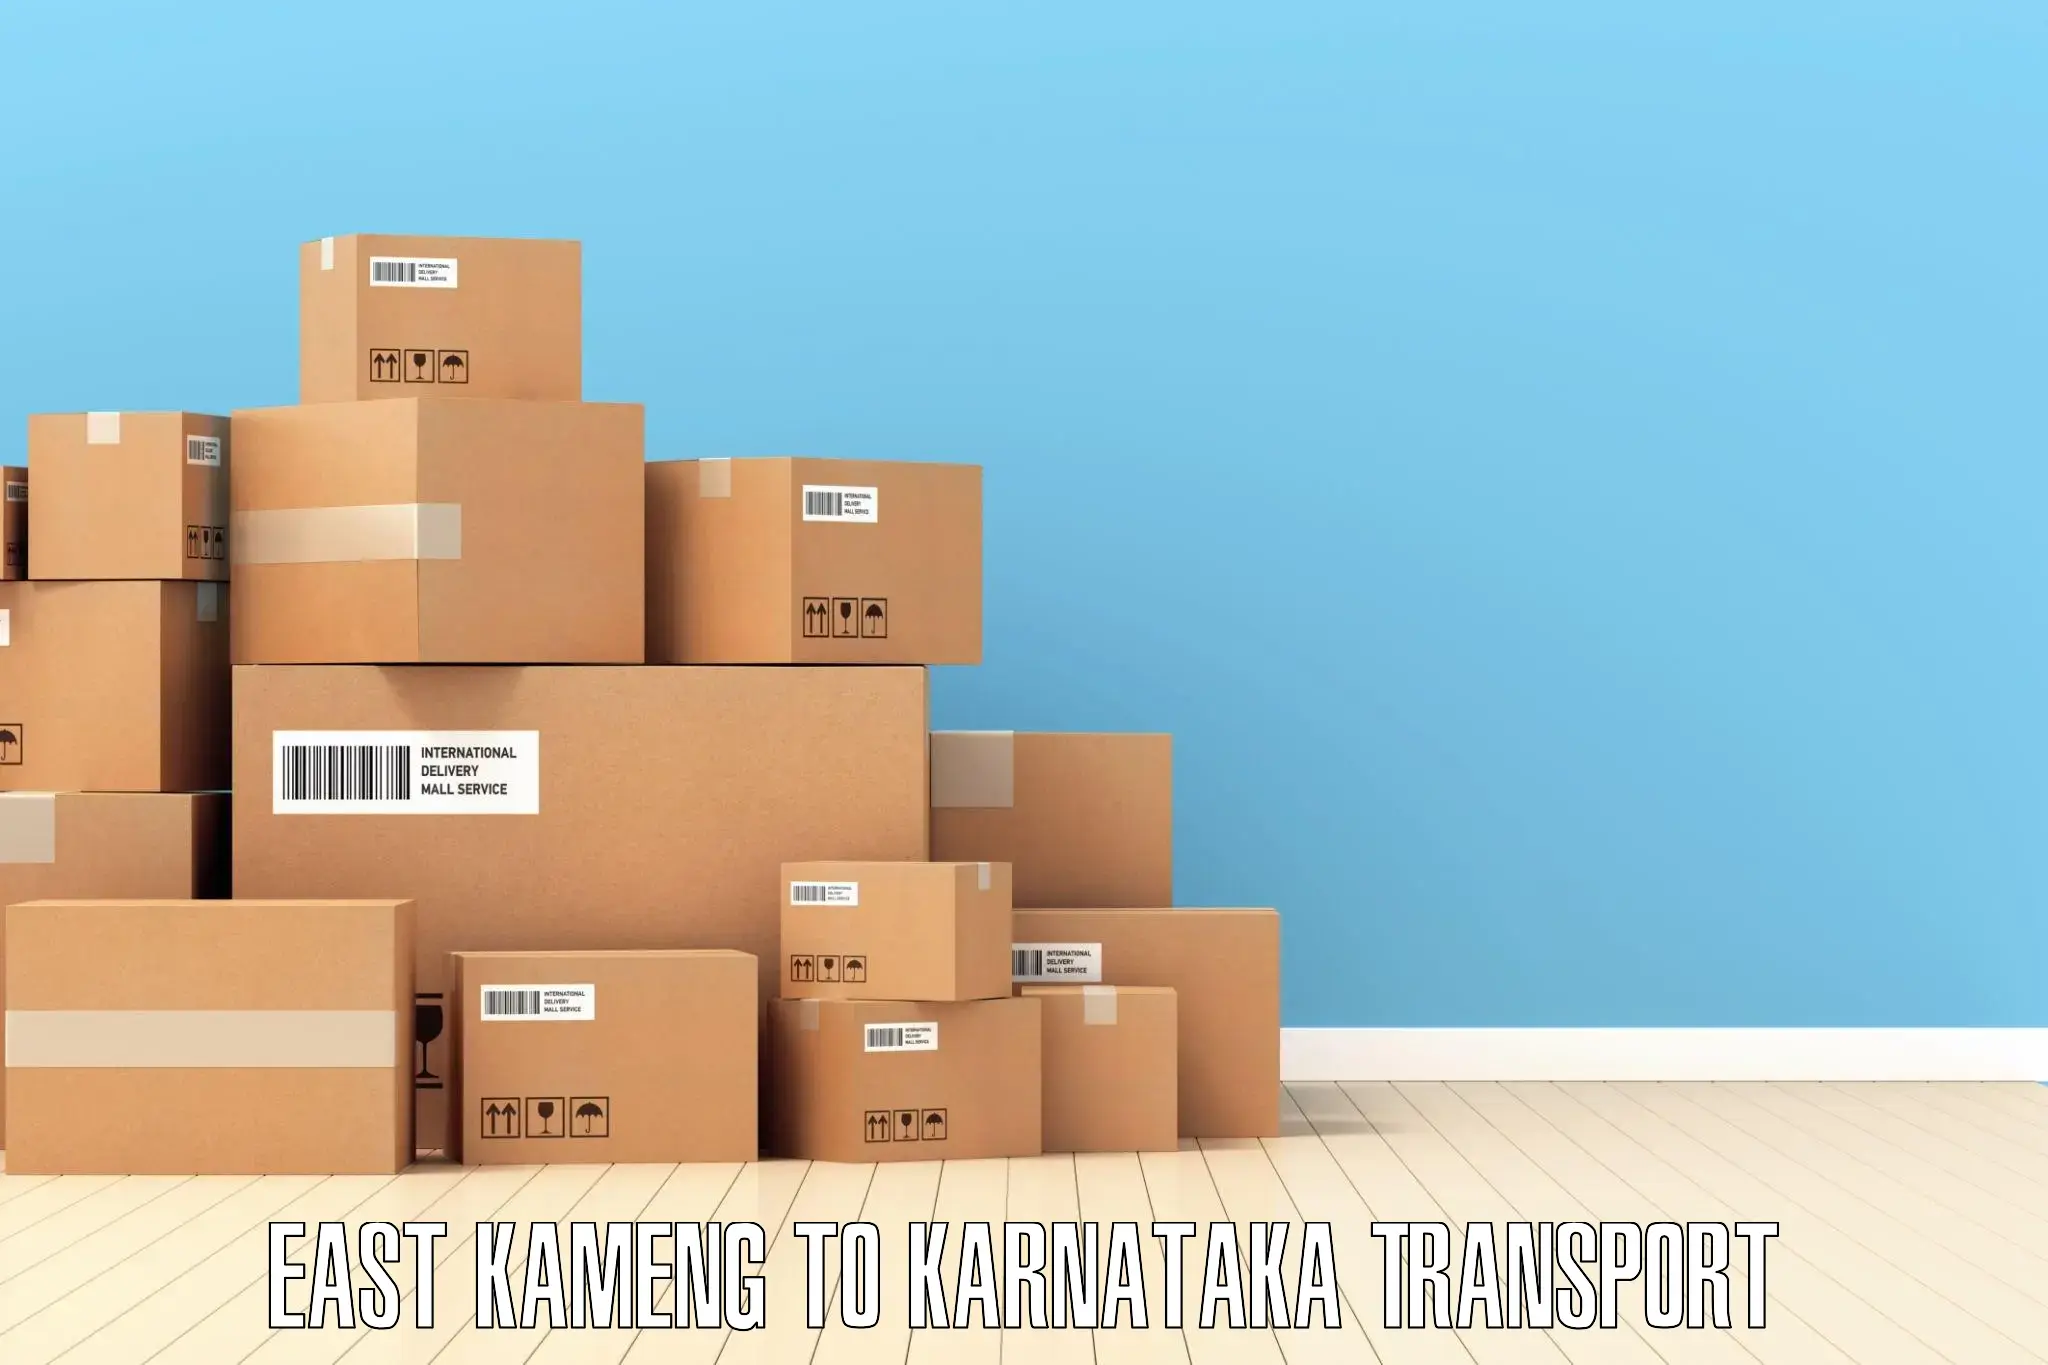 Transport in sharing East Kameng to Bhadravathi